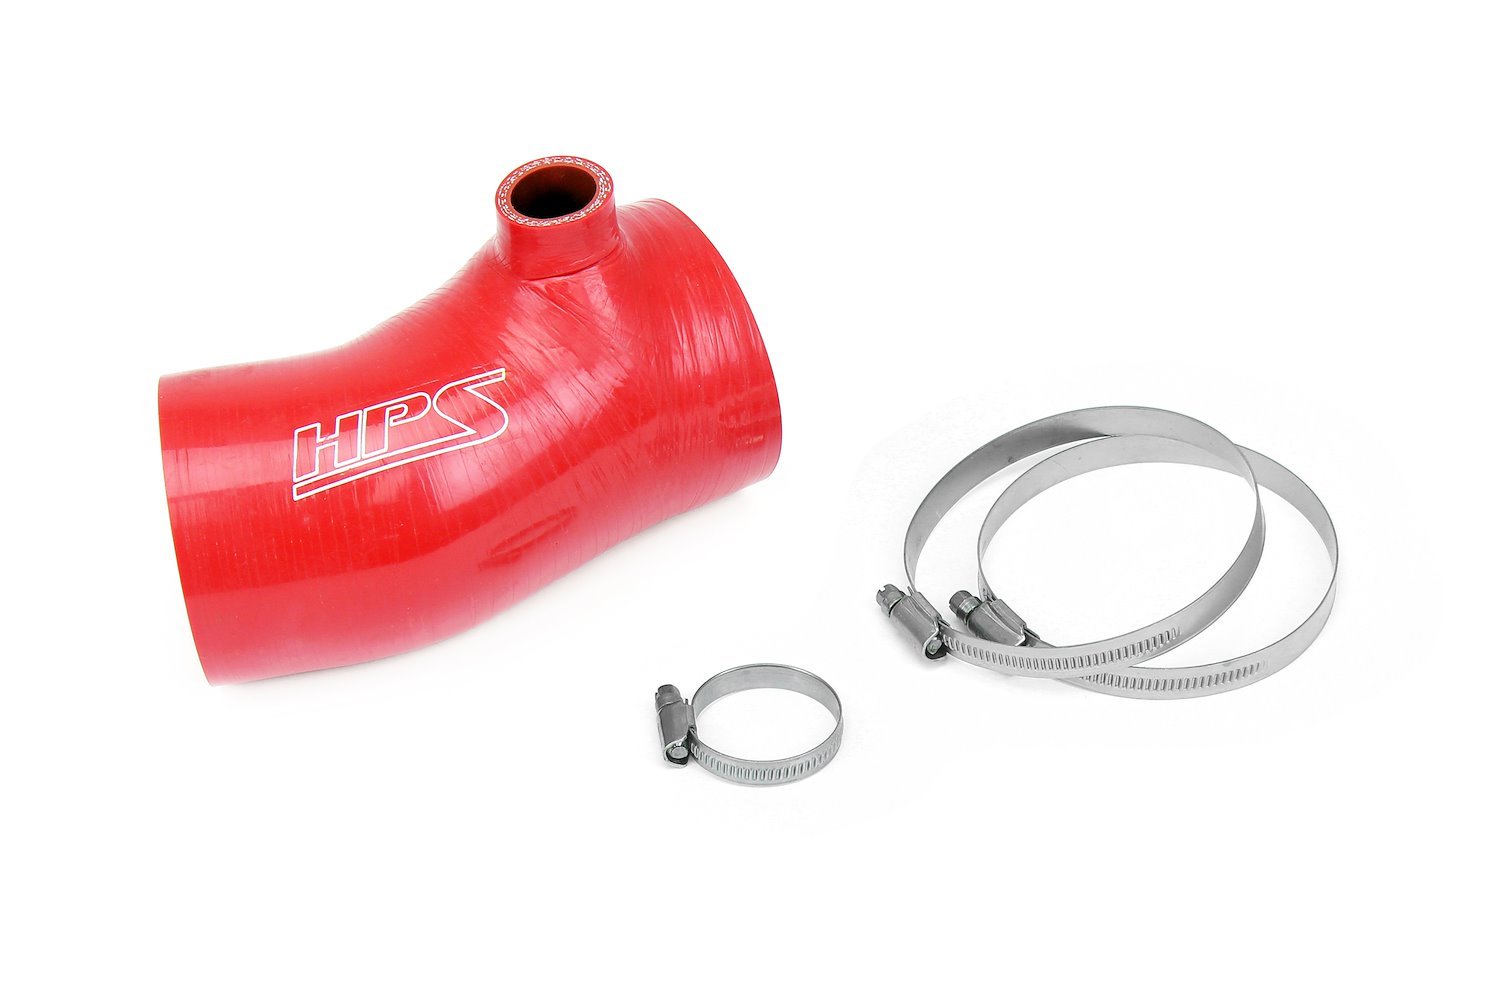 57-1880-RED Silicone Air Intake Kit, Replace Damaged Or Restrictive Stock Air Intake, Improve Throttle Response